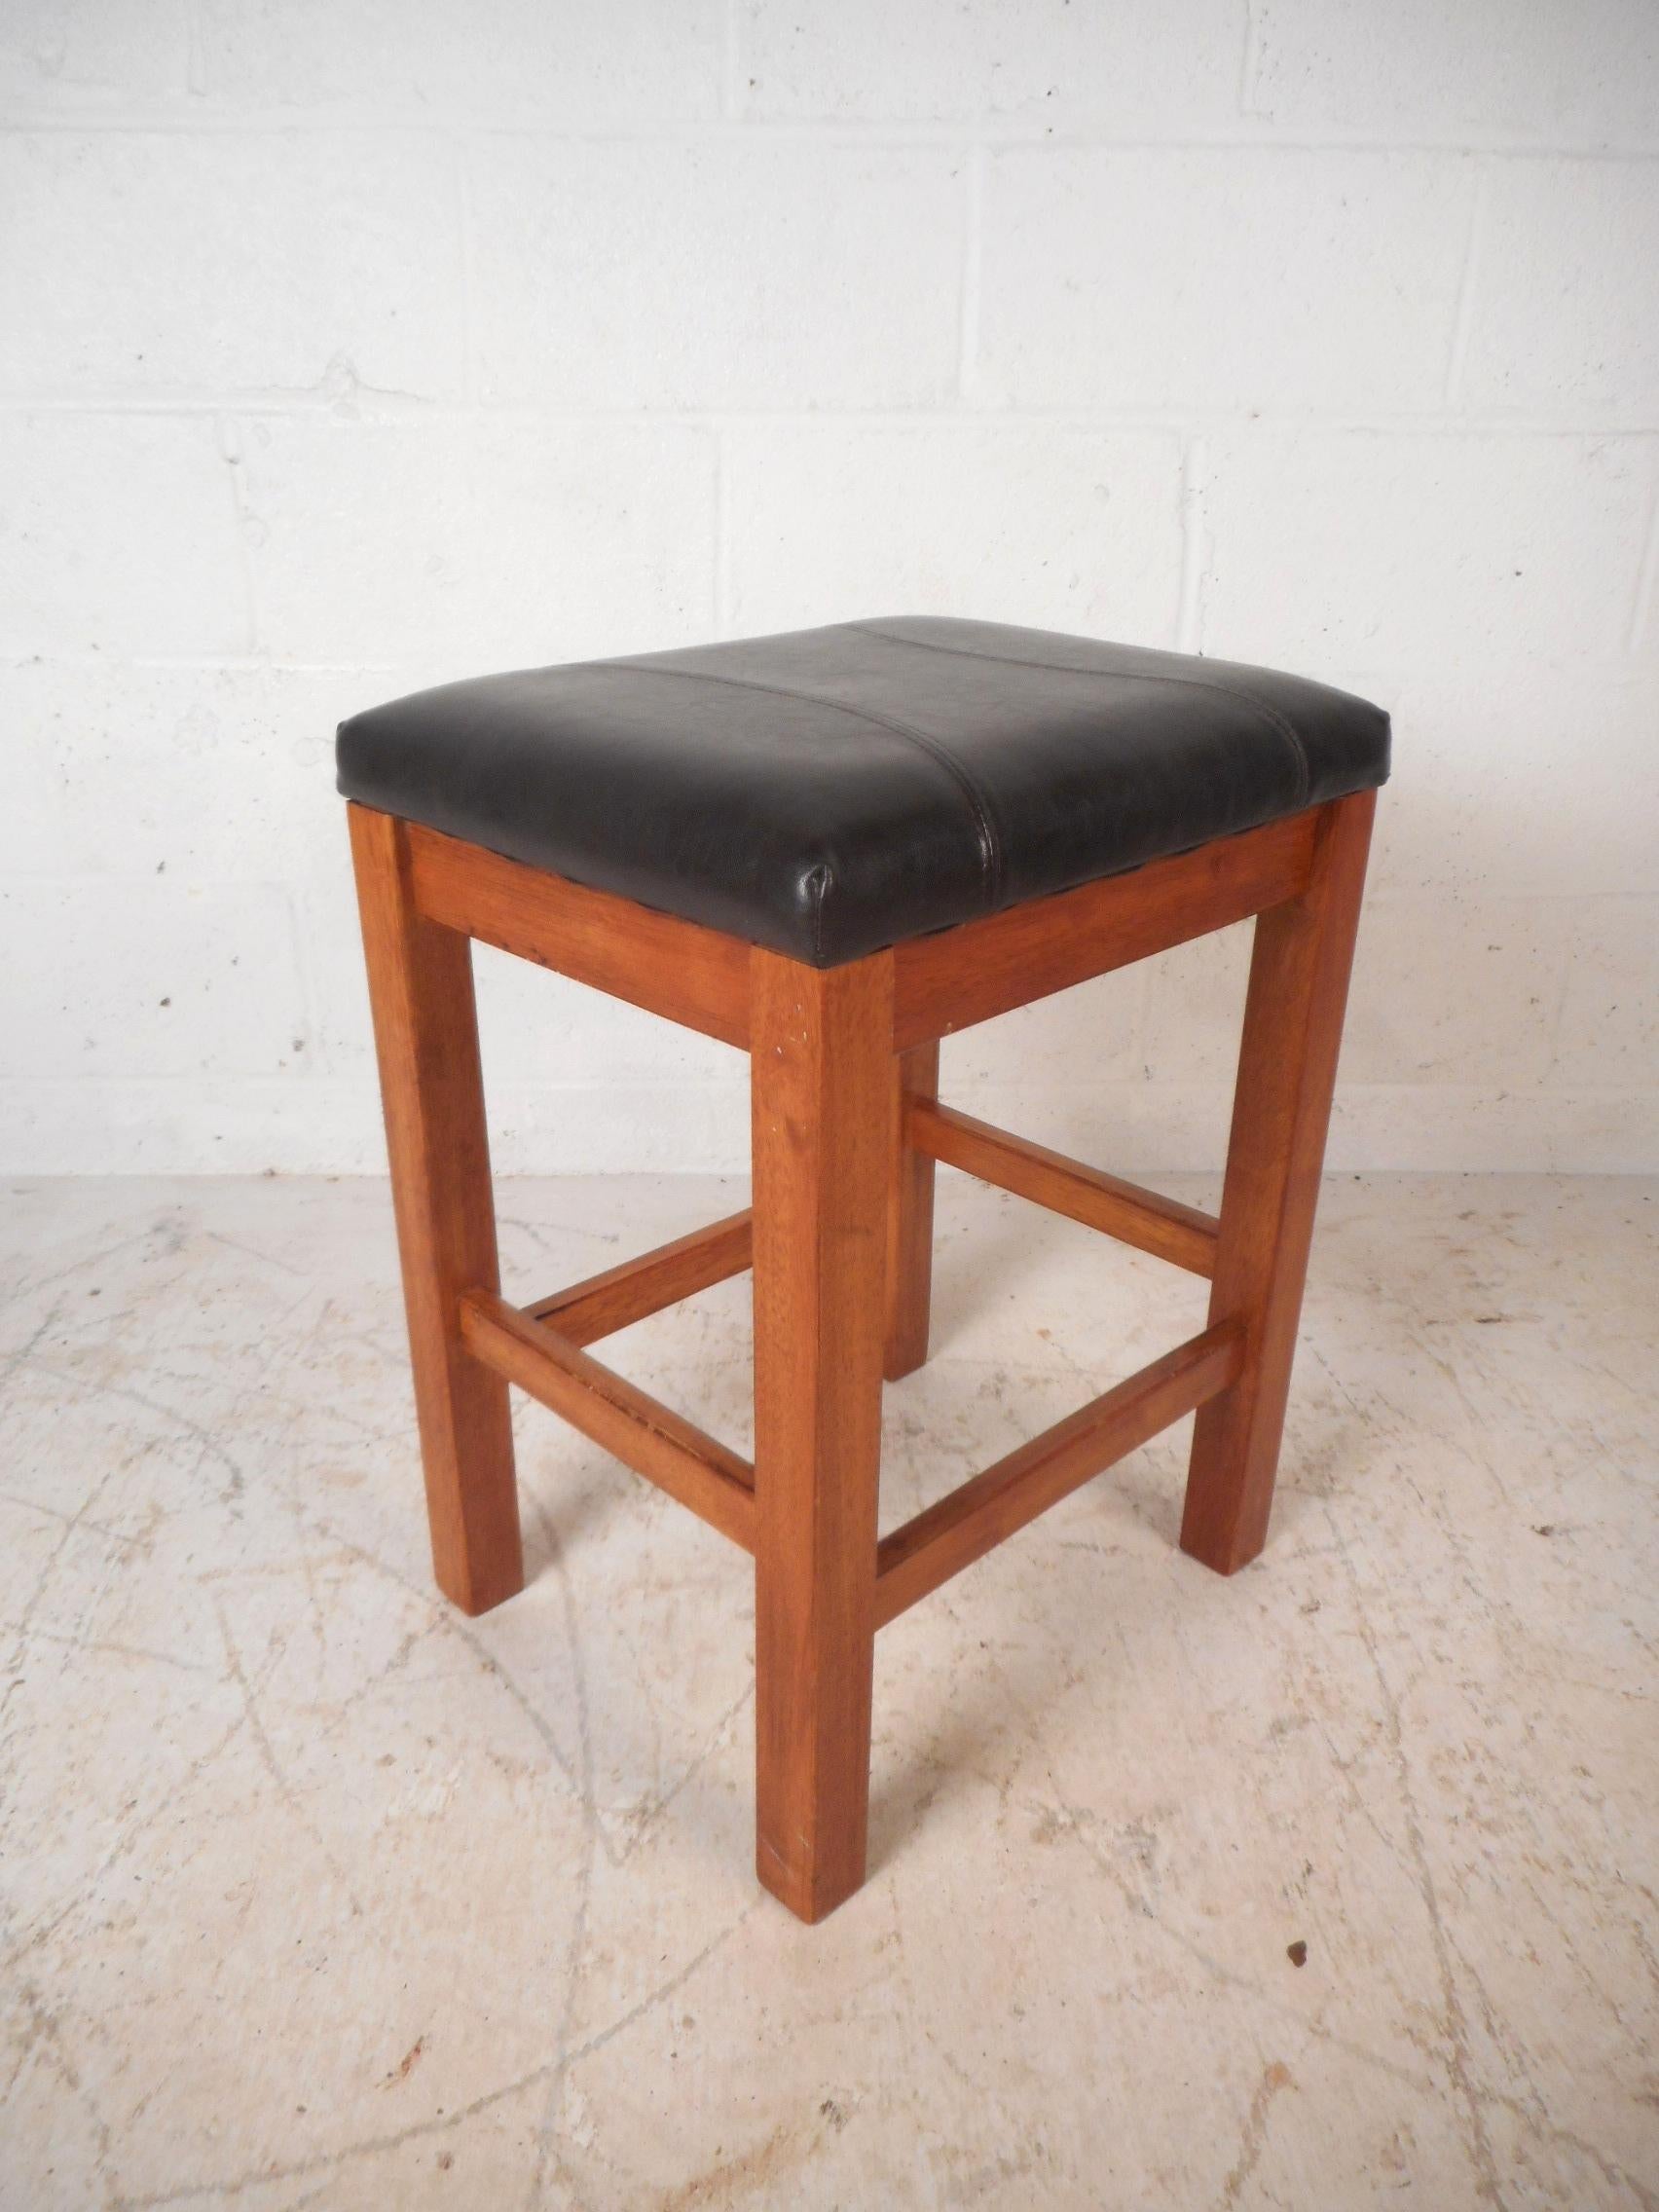 This beautiful set of four midcentury style bar stools feature a thick padded seat covered in stitched black vinyl. A straight line design with a sturdy walnut frame and a conveniently placed kick rest for maximum comfort. This stunning set makes